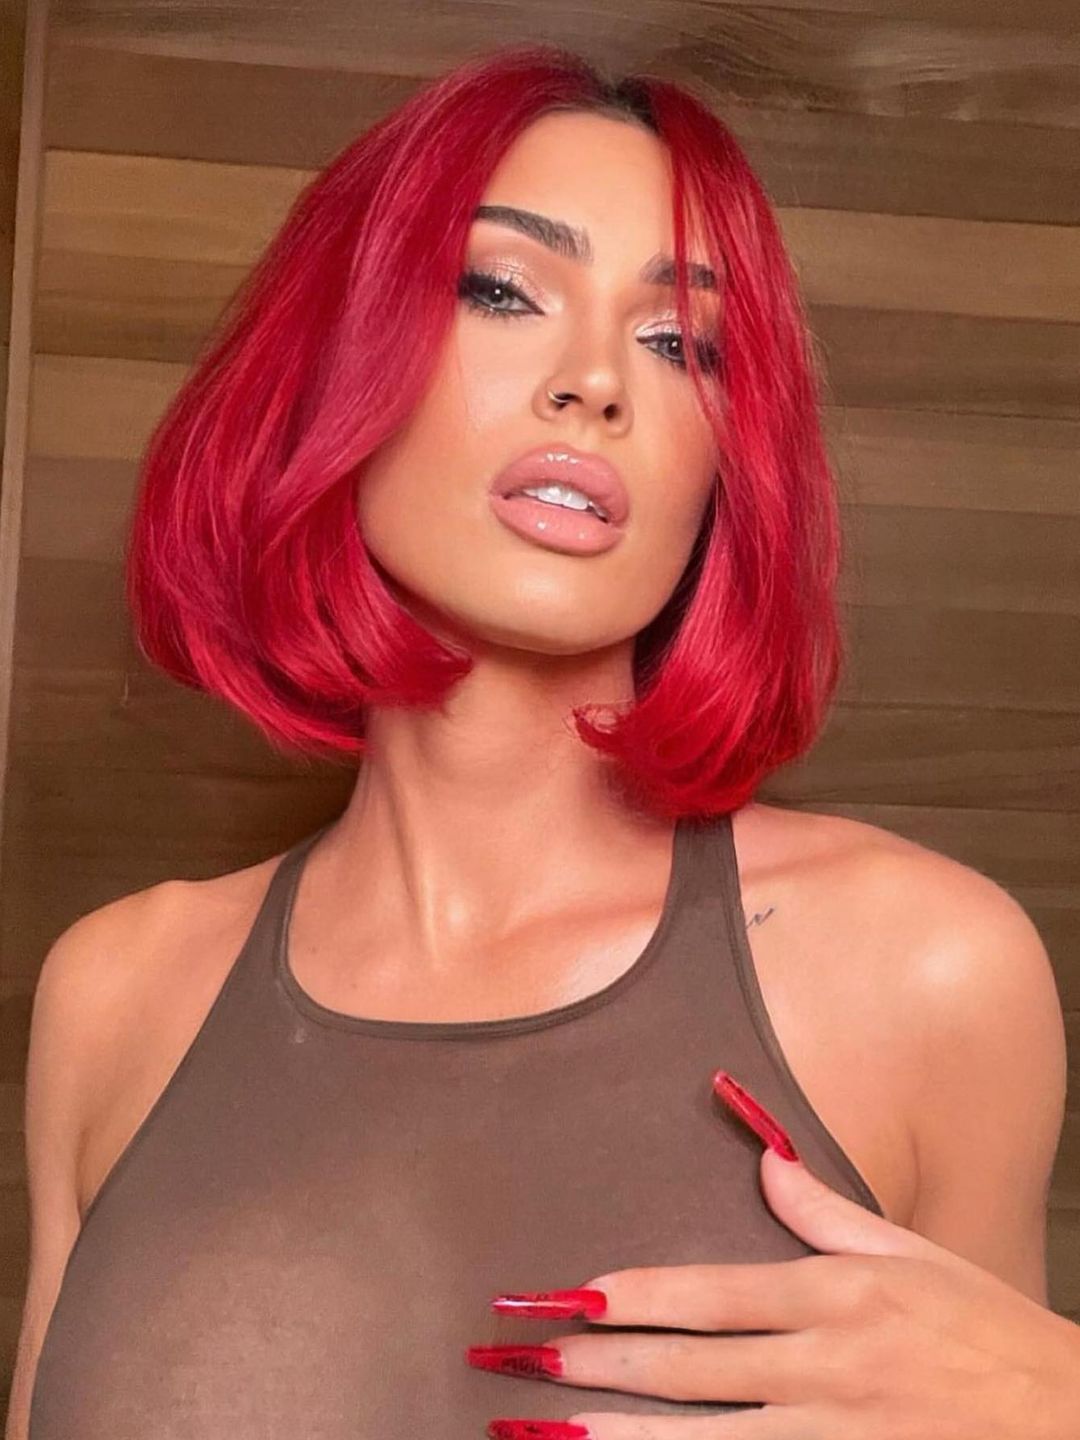 Megan Fox poses with a red bob hairdo and brown tank top on her Instagram